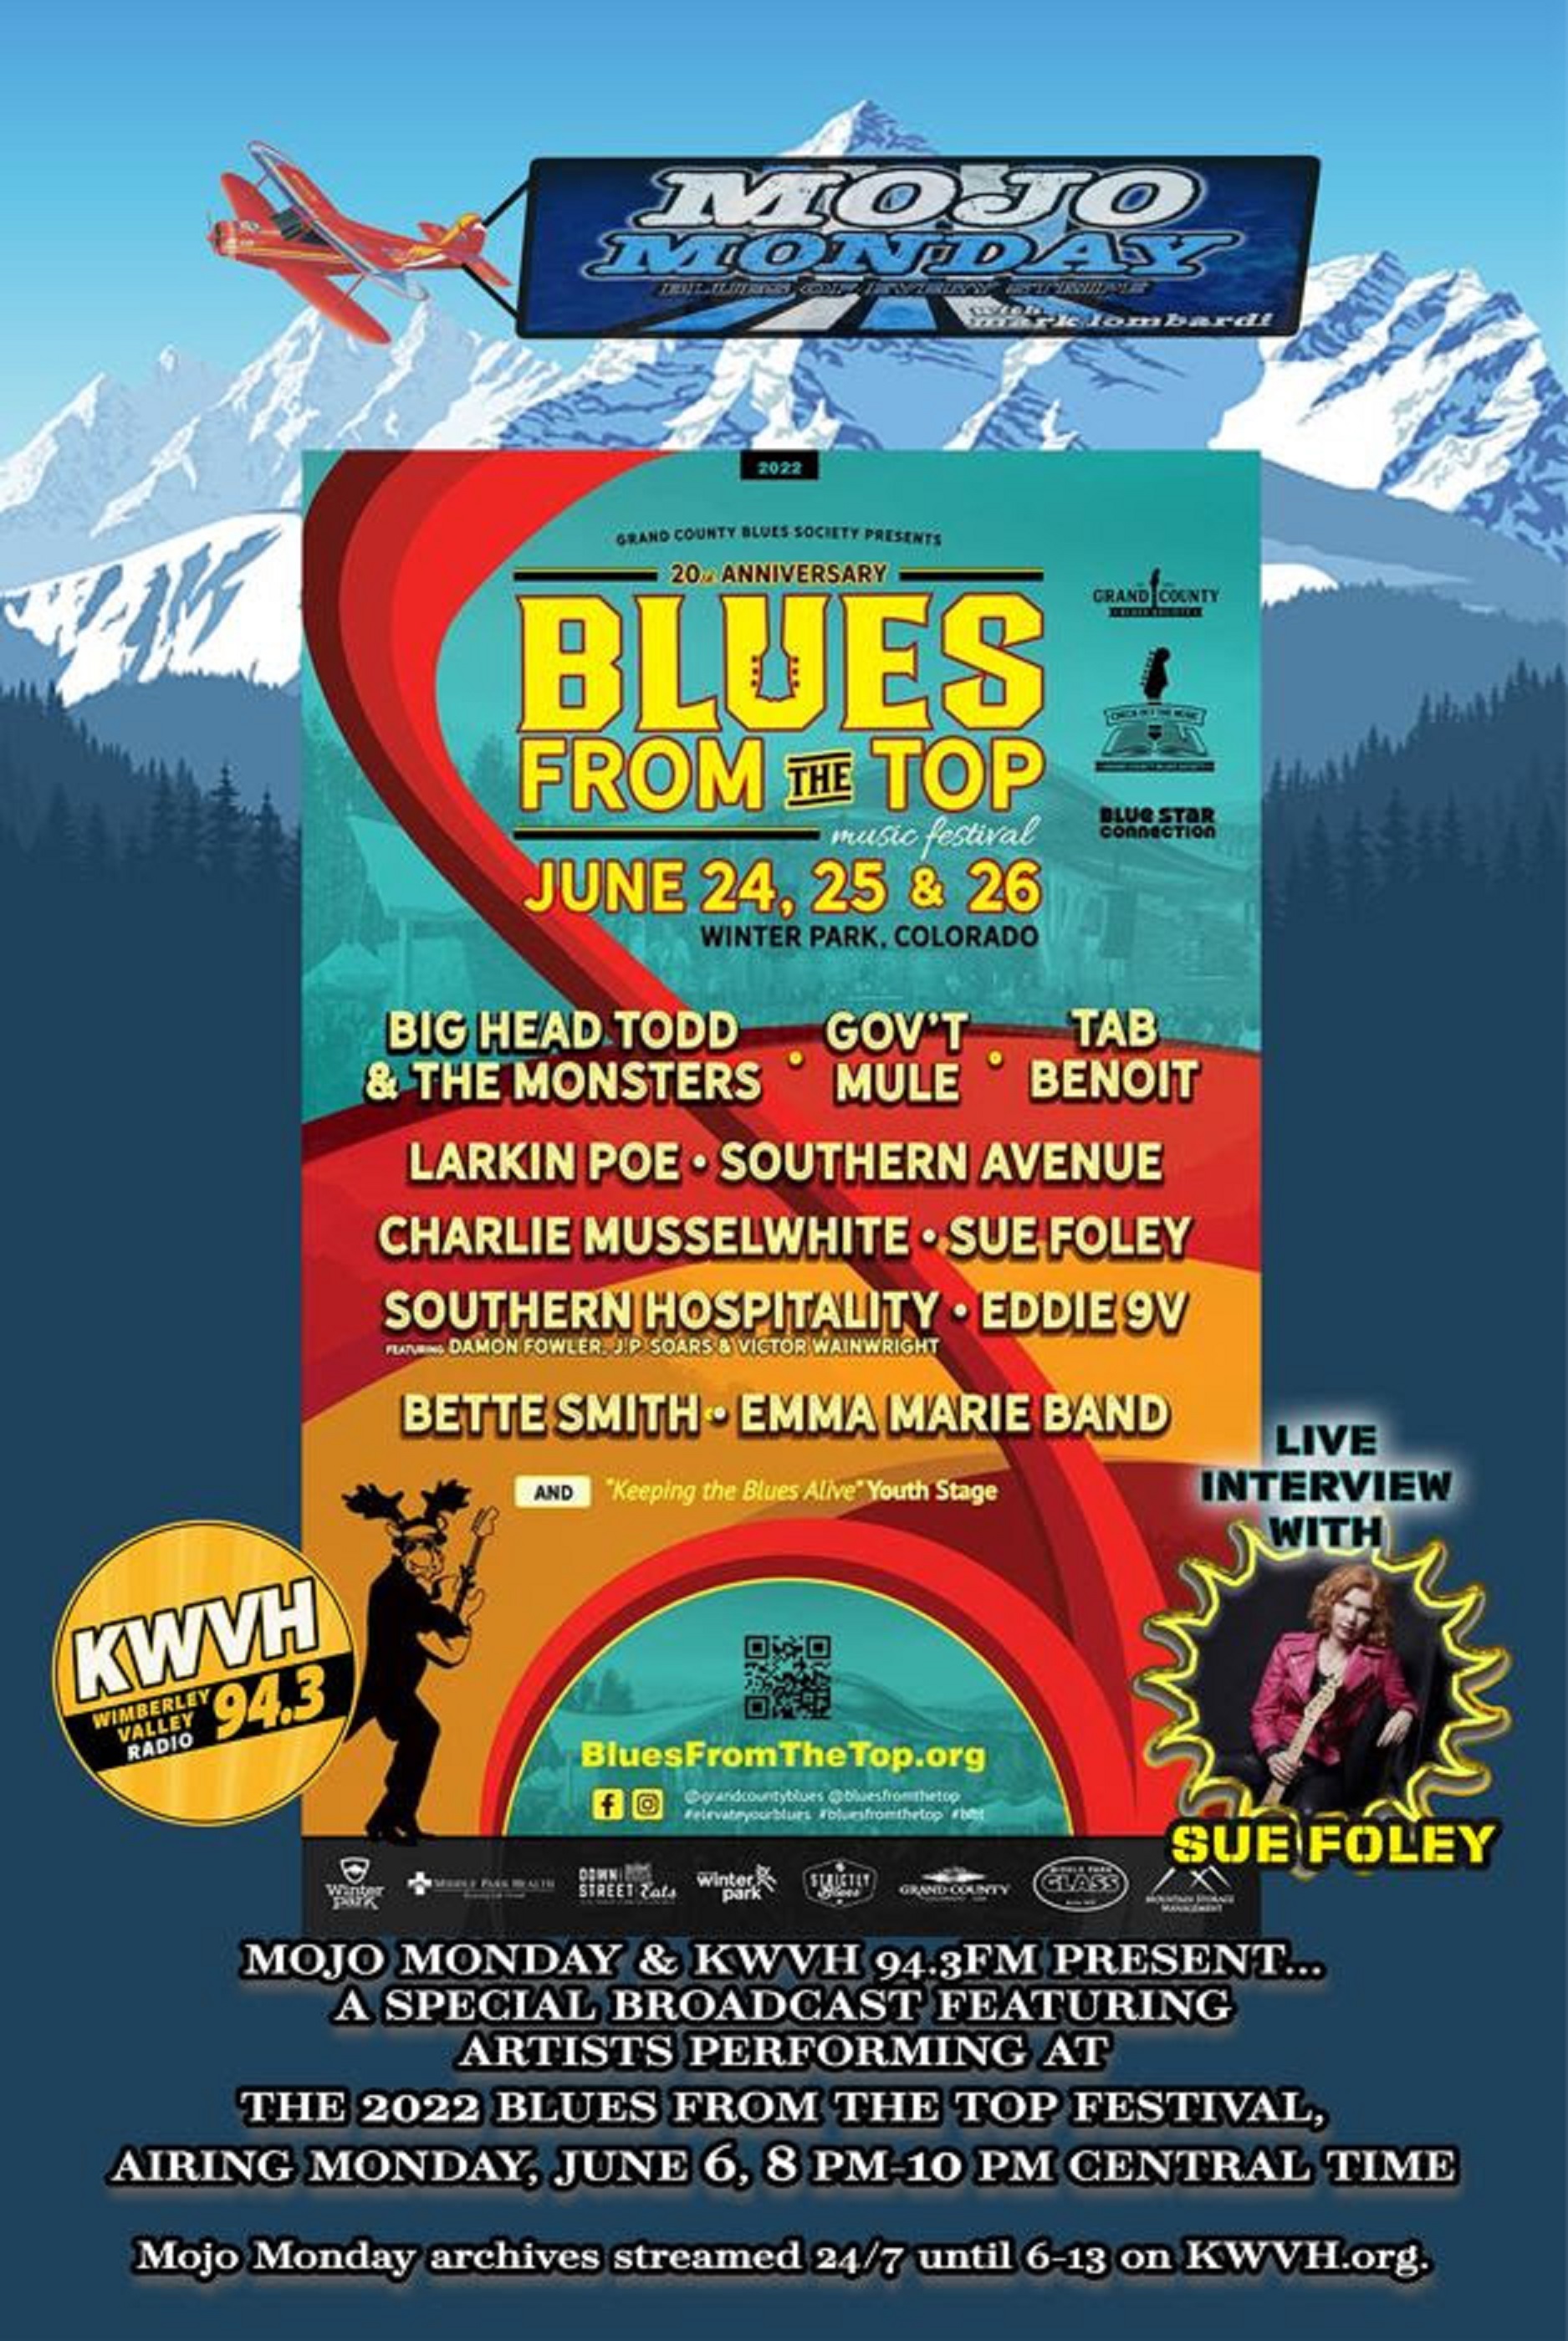 Mojo Monday & KWVH 94.3 Special Broadcast Featuring Artists Performing at Blues From The Top Music Festival